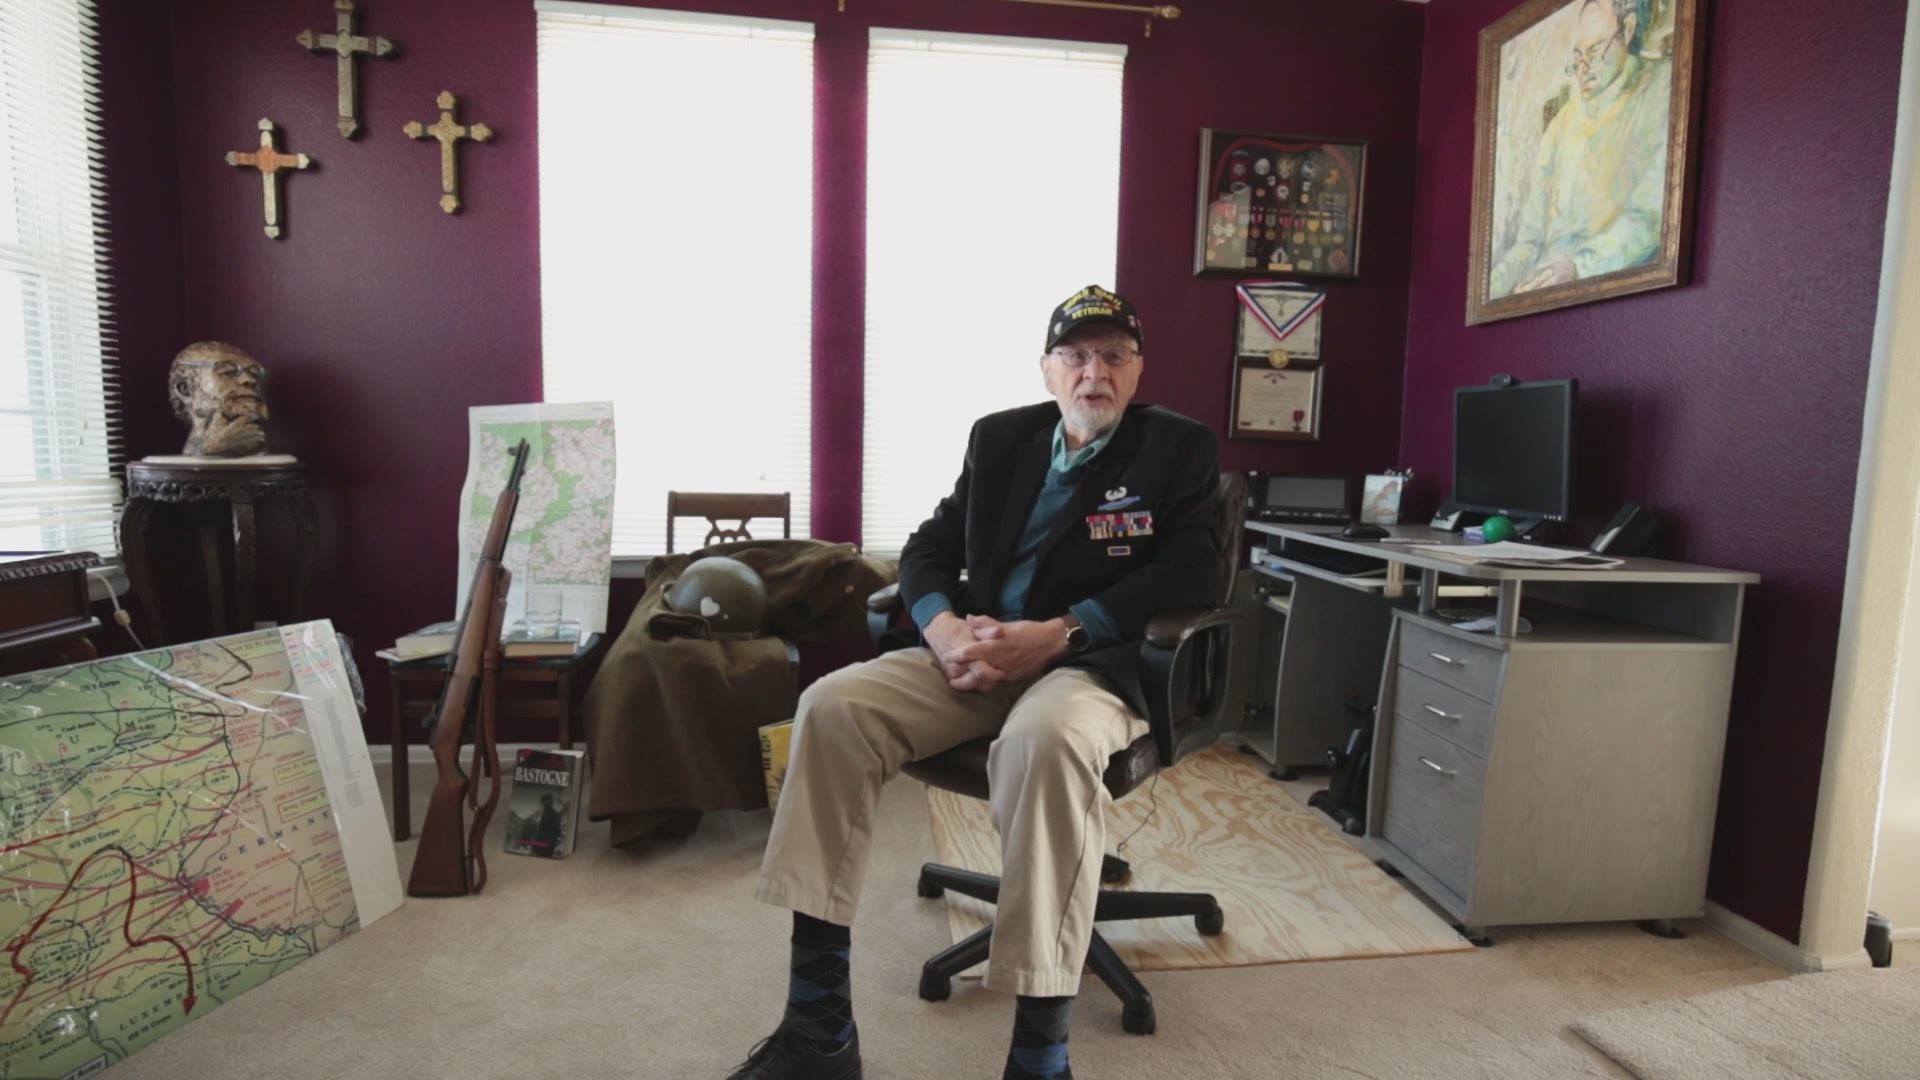 Zoghby and his fellow soldiers earned Bronze Stars for their service. Zoghby shared his story to remind younger generations of how their freedom has been defended.